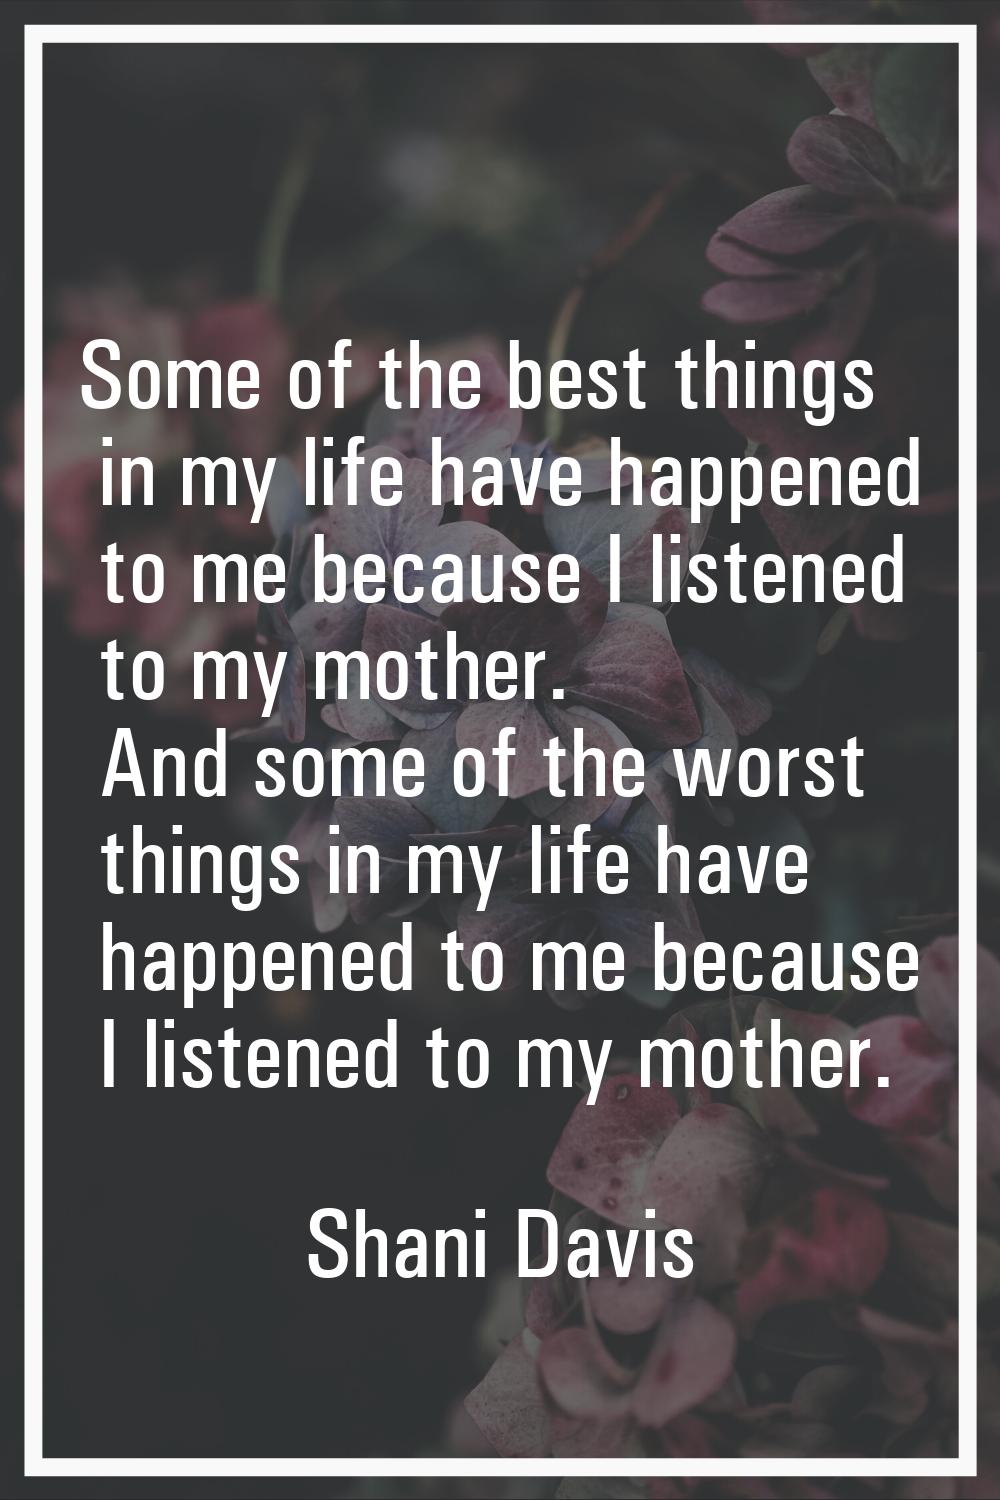 Some of the best things in my life have happened to me because I listened to my mother. And some of